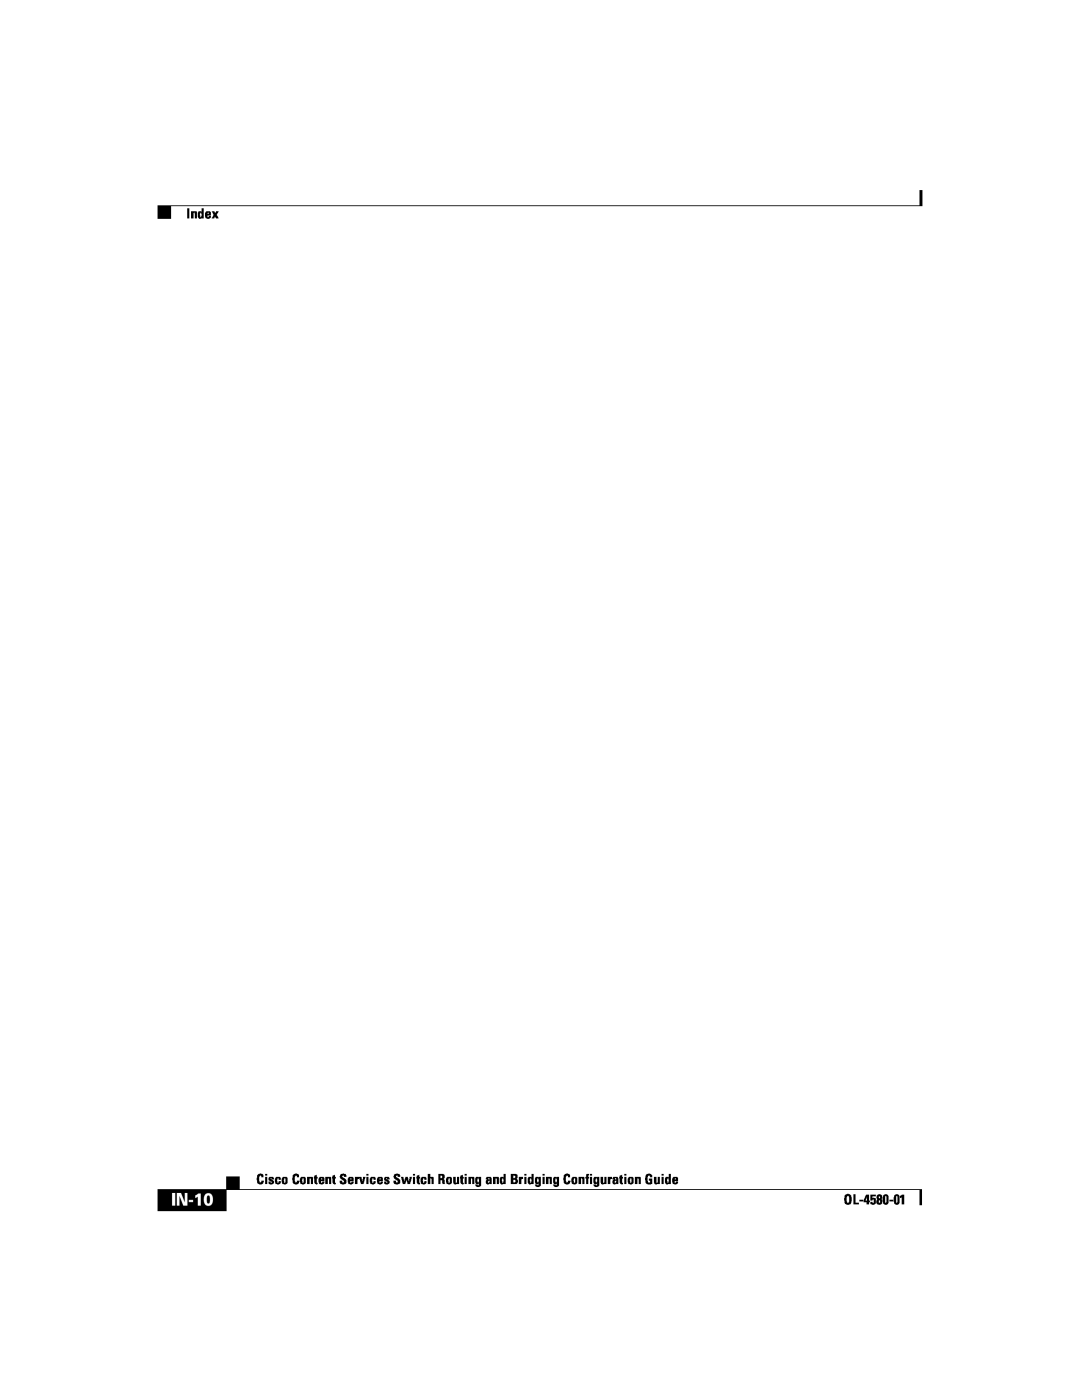 Cisco Systems OL-4580-01 manual IN-10, Index 